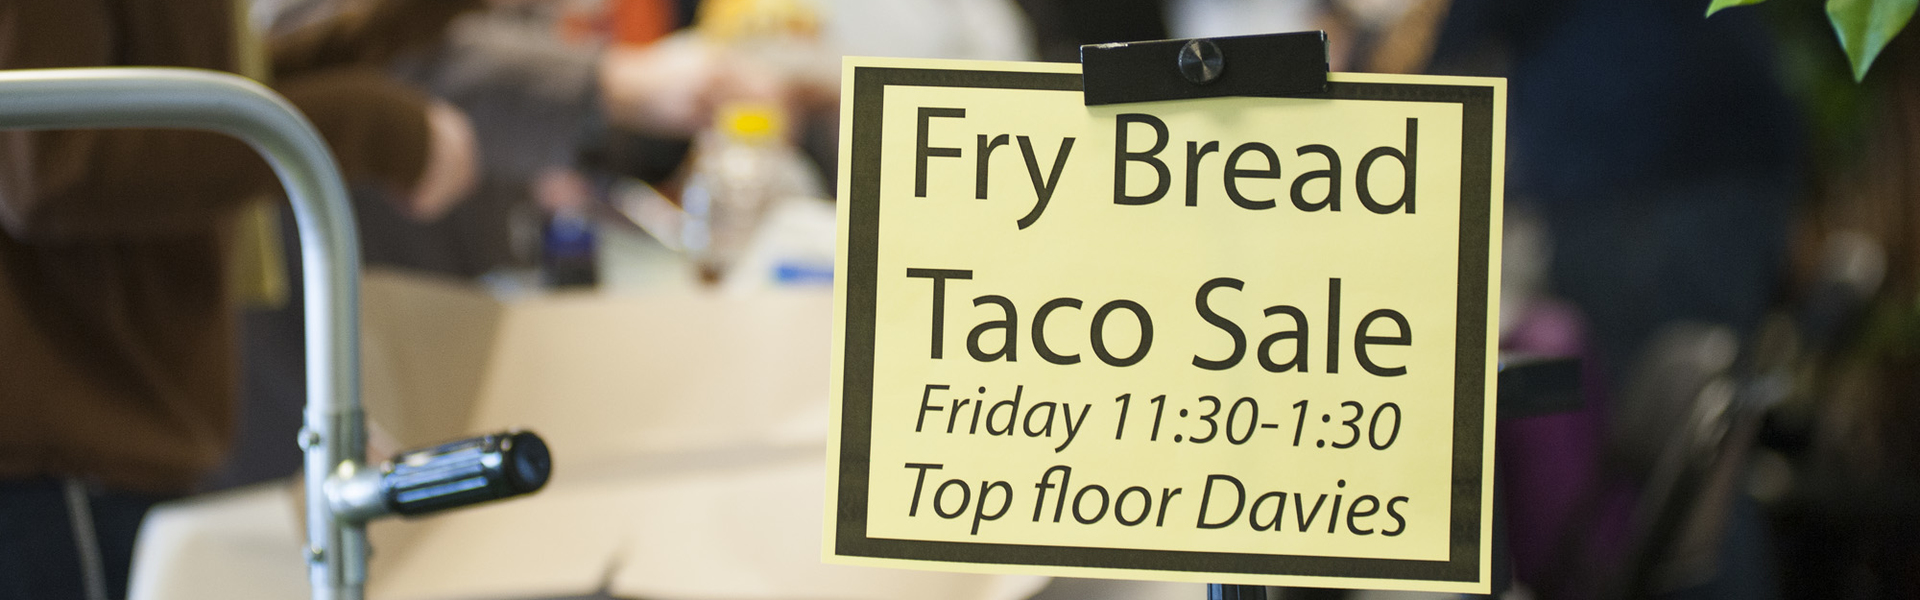 Fry Bread sale sign, student run event